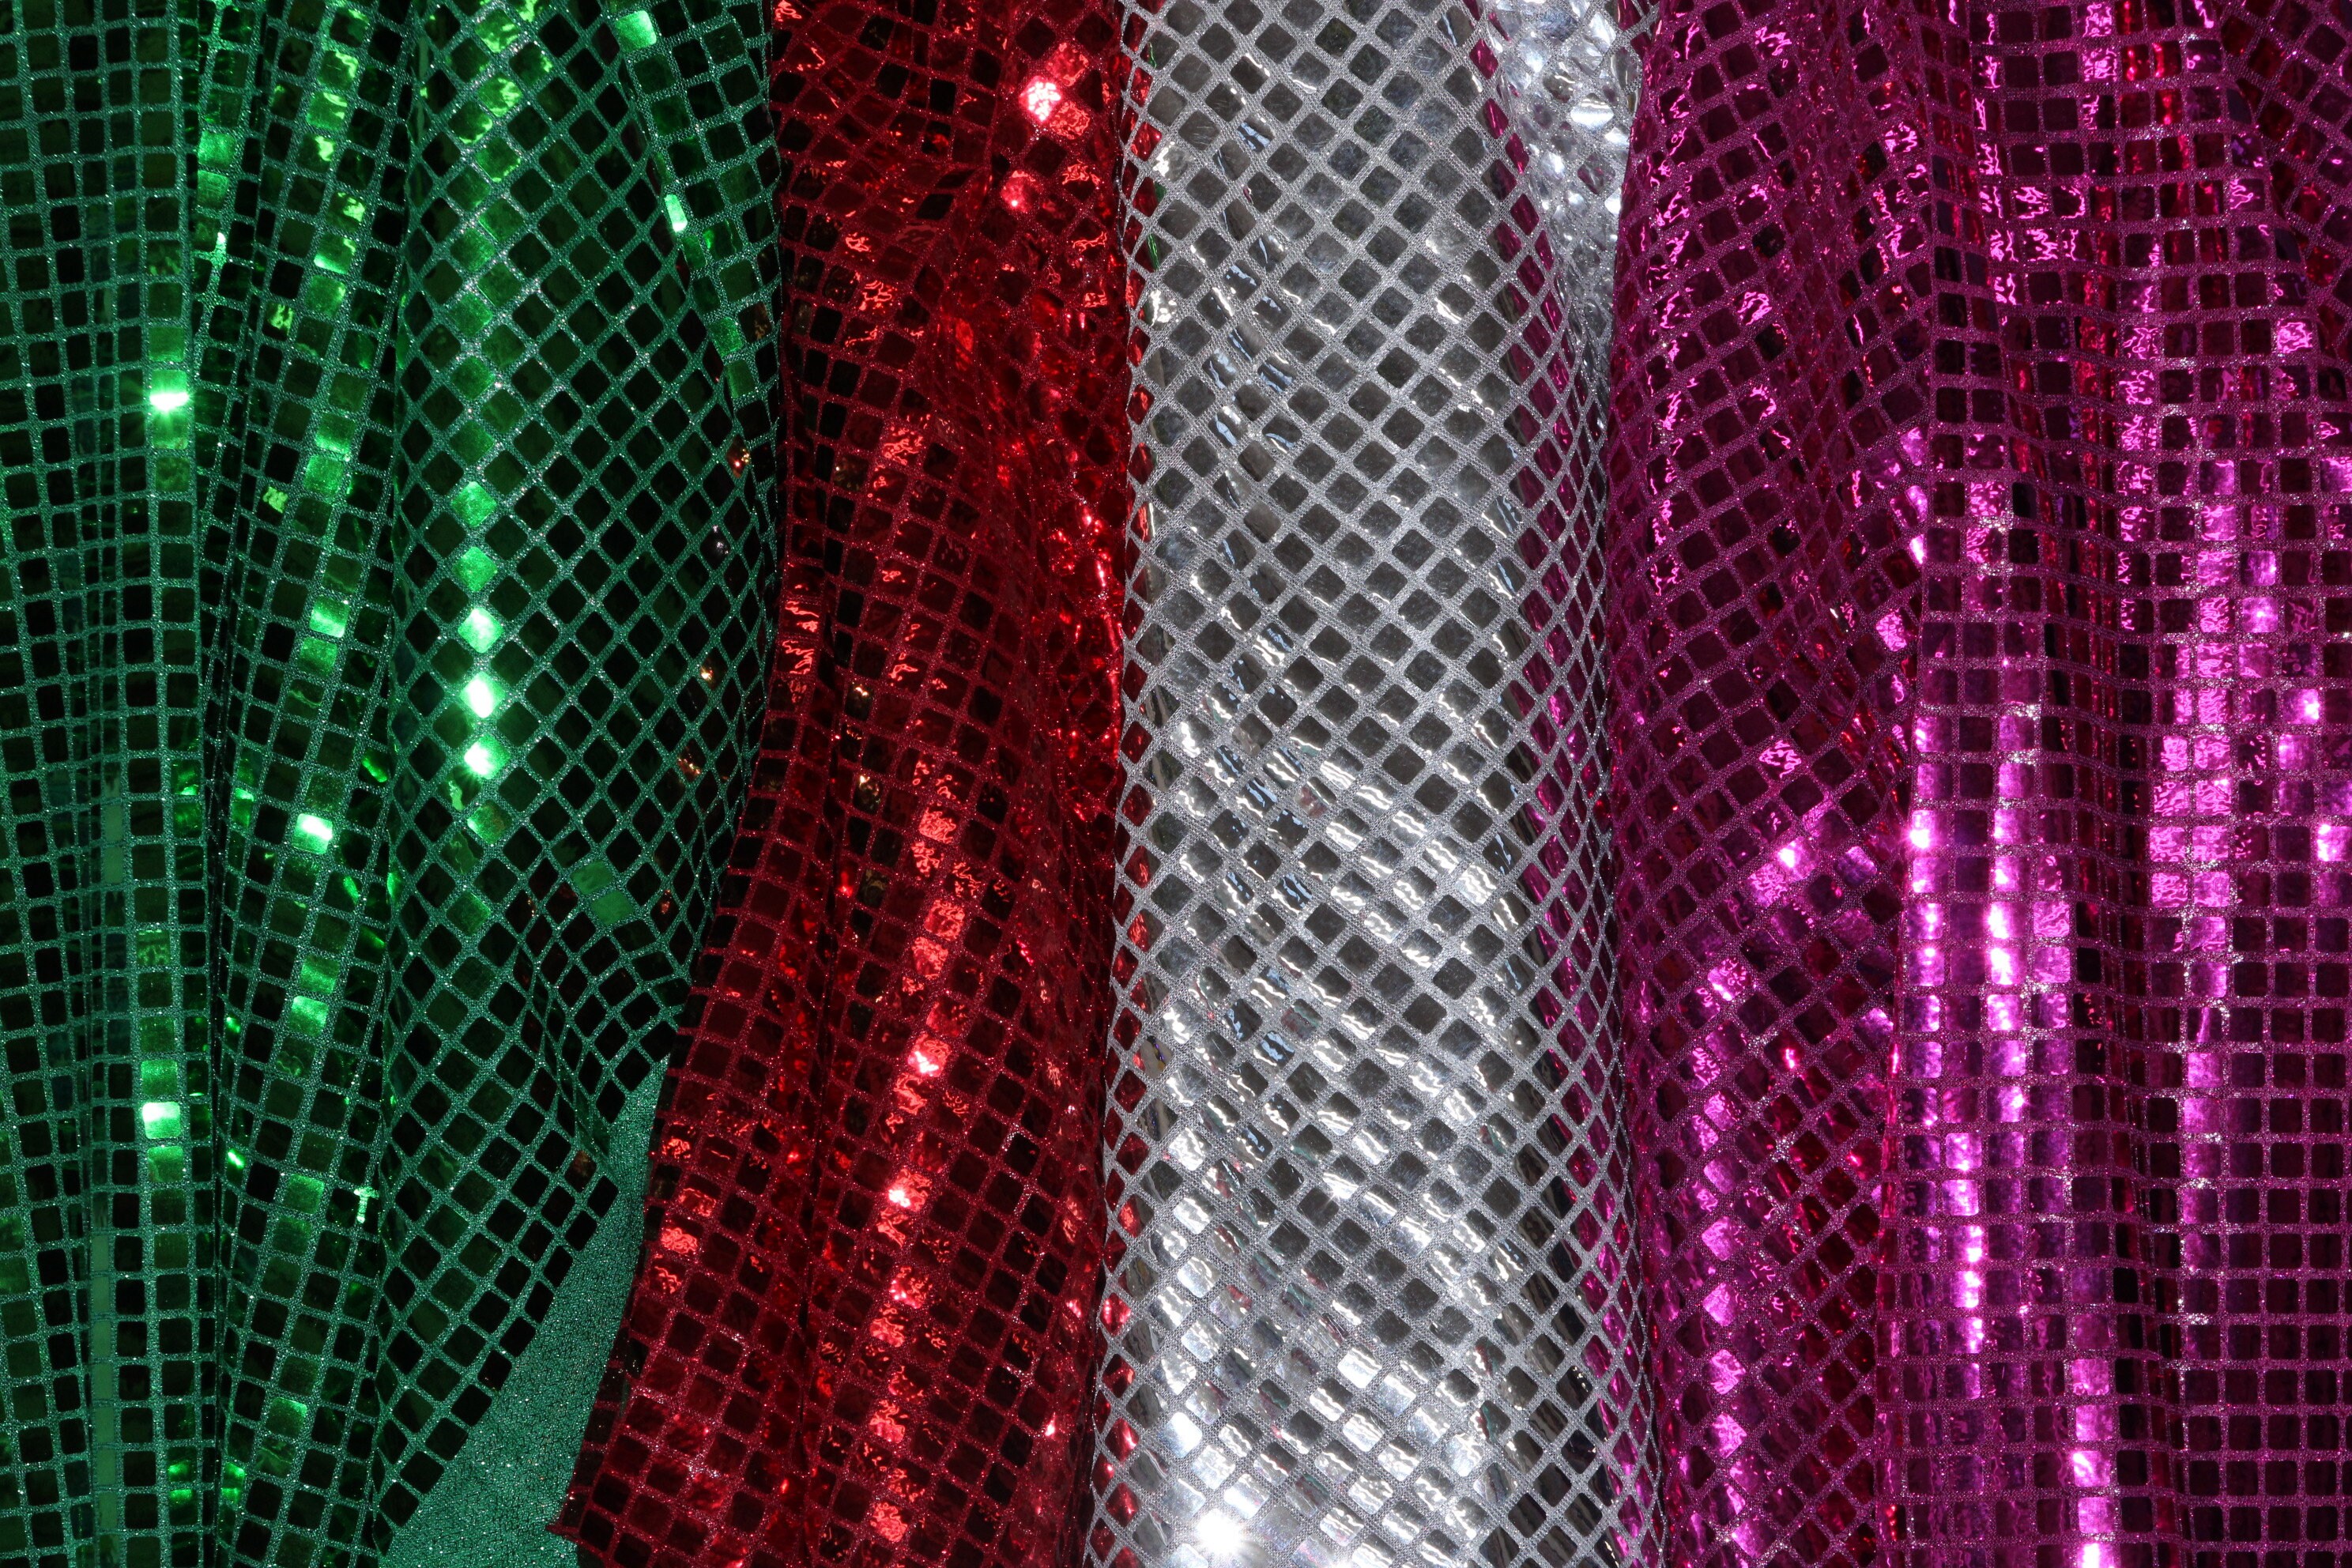 SALE Silver Metallic Stretch Netting Fabric 5872 Ballet Pink, by the yard